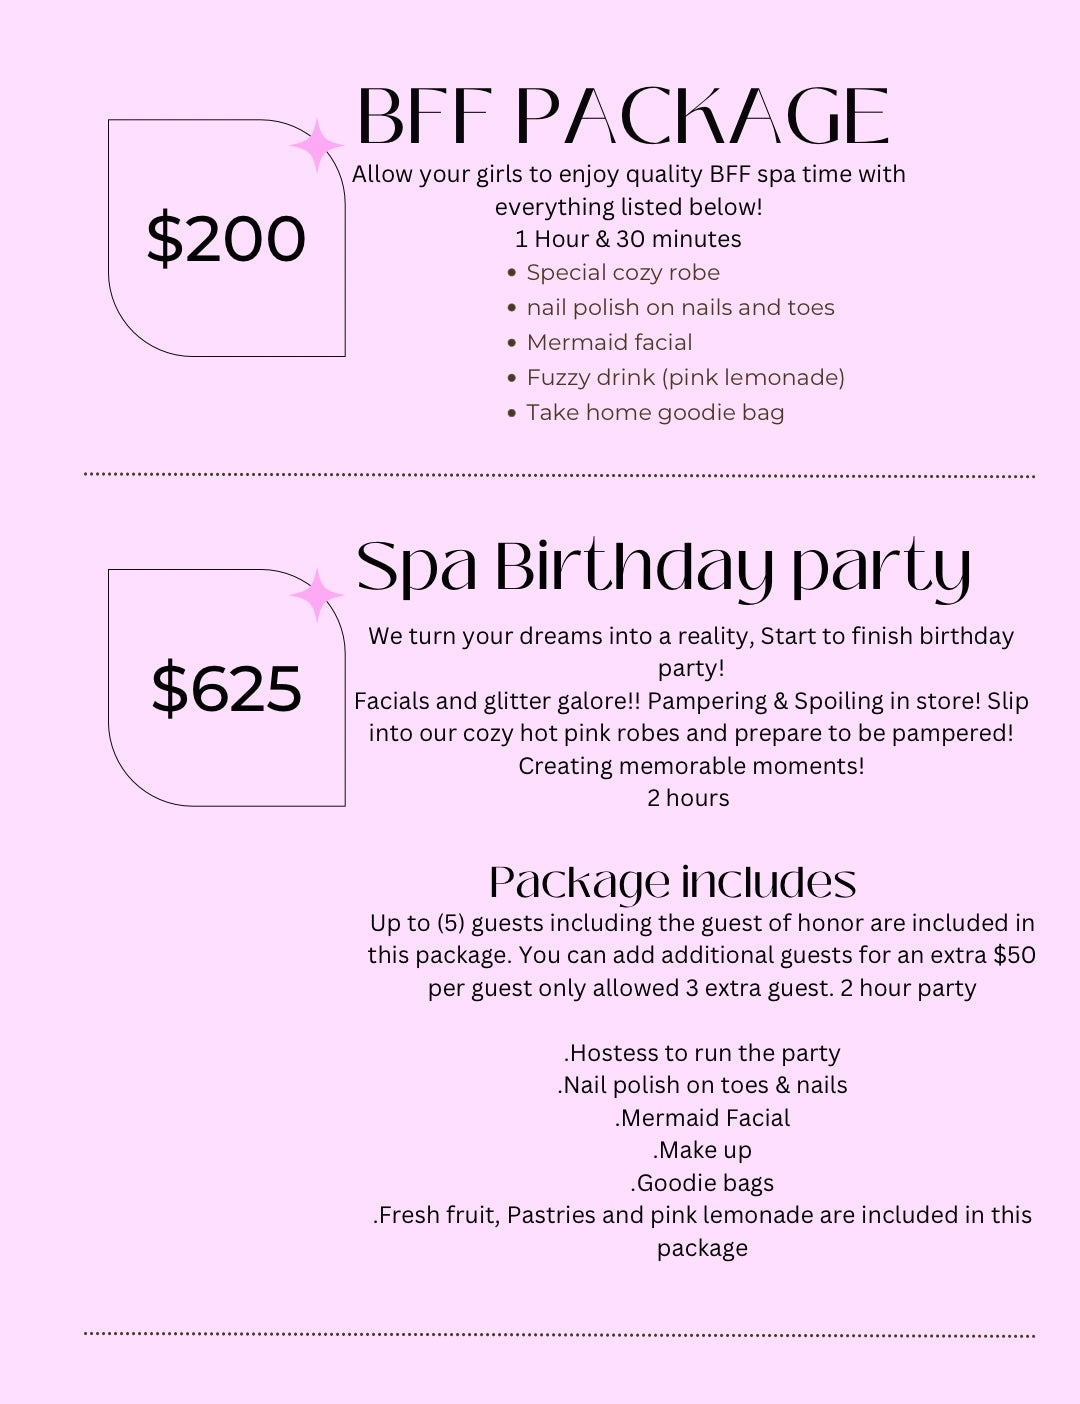 Spa Birthday Party for Kids!